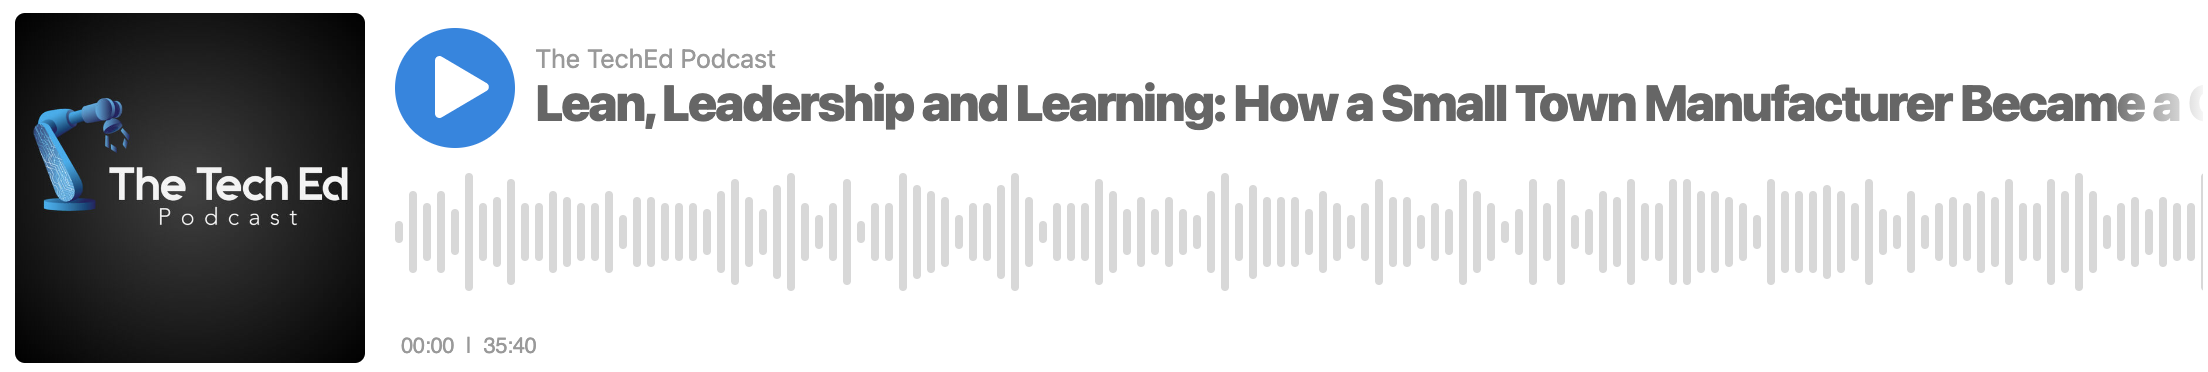 Lean, Leadership and Learning: How a Small Town Manufacturer Became a Global Bran podcast